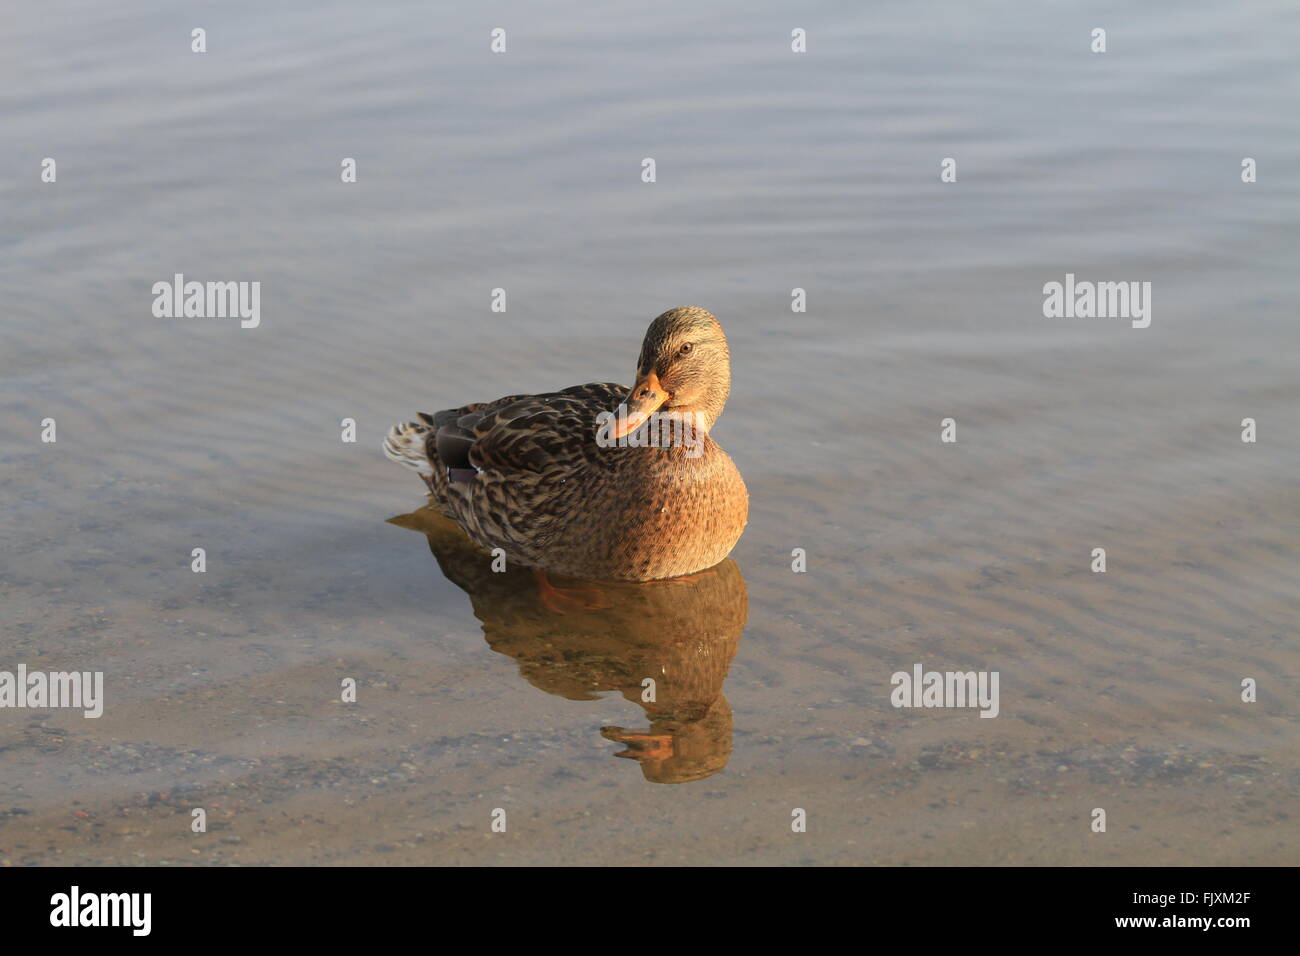 Close-Up Of Duck With Reflection In Water Stock Photo